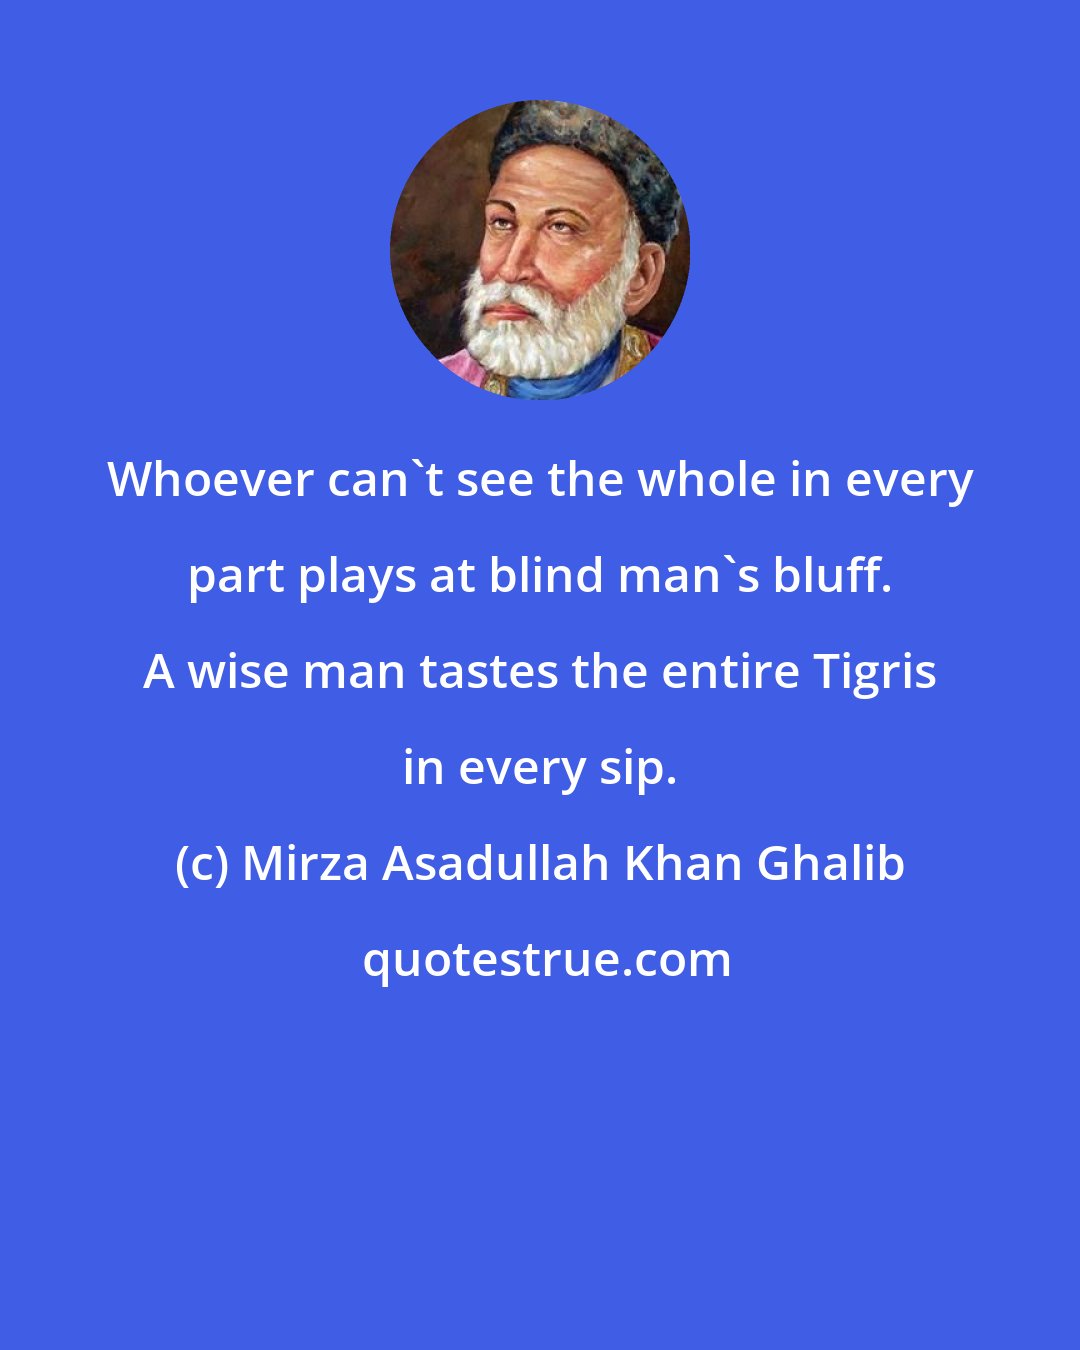 Mirza Asadullah Khan Ghalib: Whoever can't see the whole in every part plays at blind man's bluff. A wise man tastes the entire Tigris in every sip.